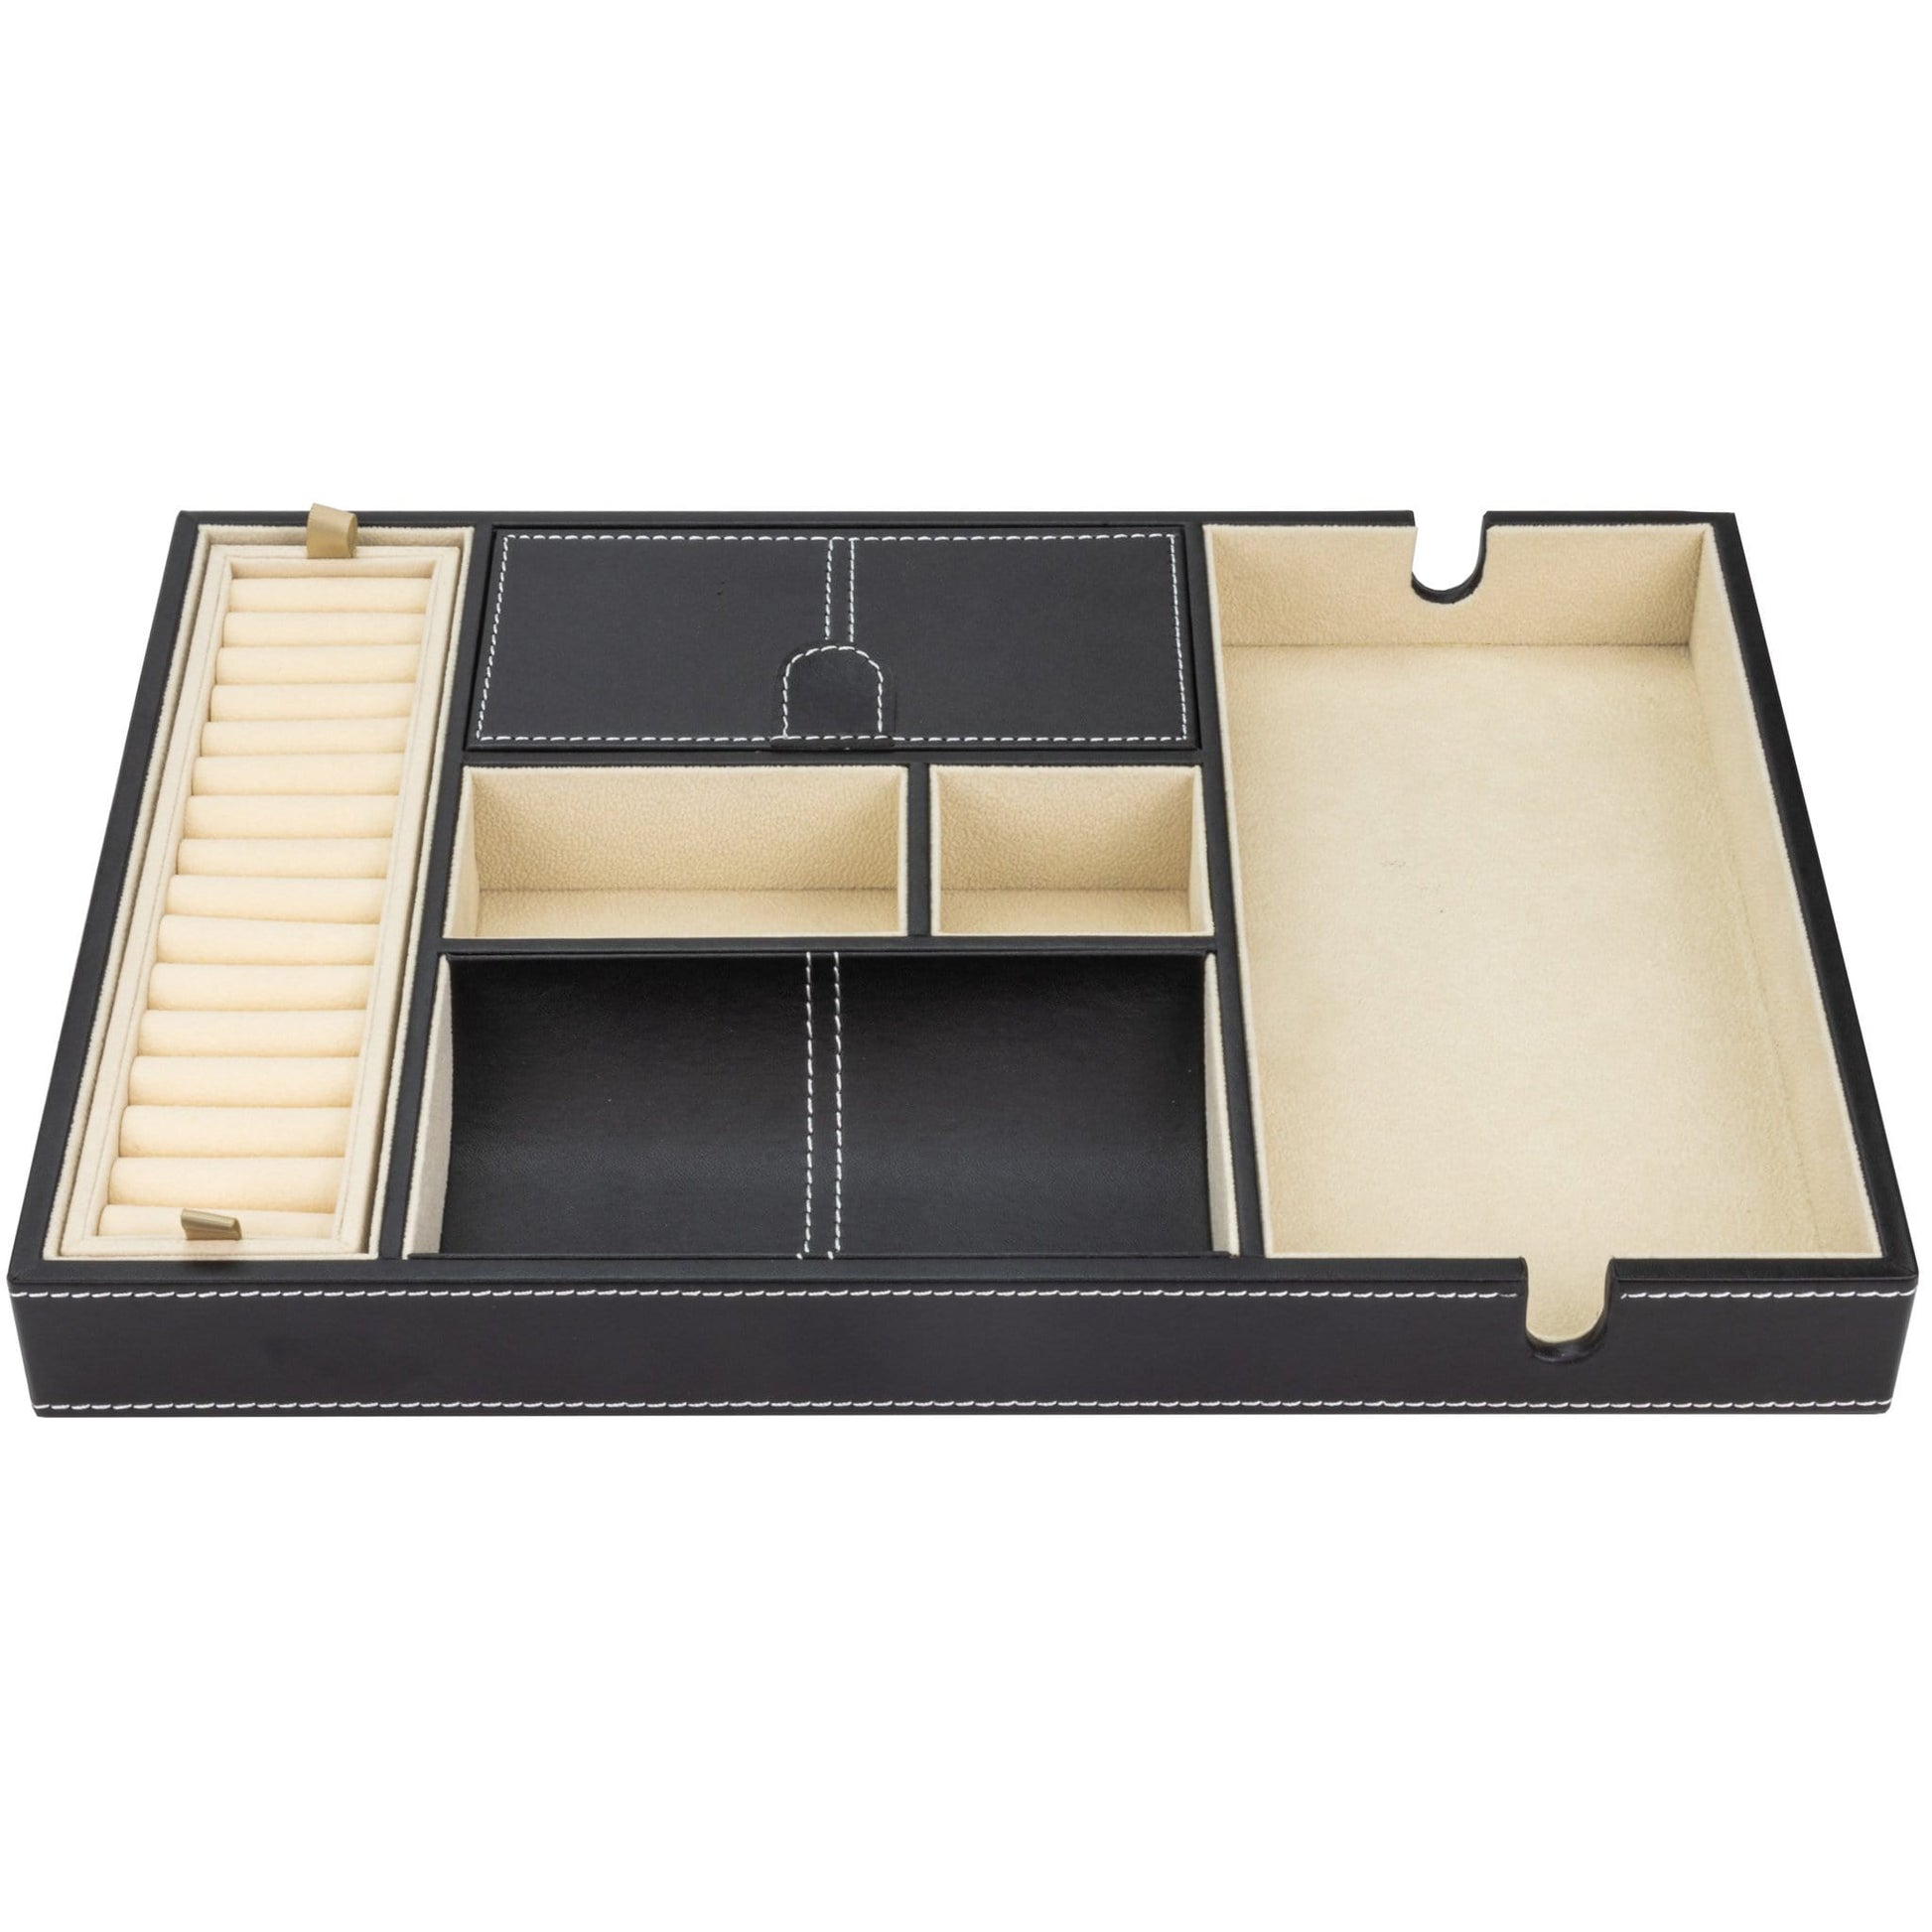 HOUNDSBAY Valet Organizer Ring, Cufflink, and Jewelry Tray for Admiral, Commander, and Victory Valets